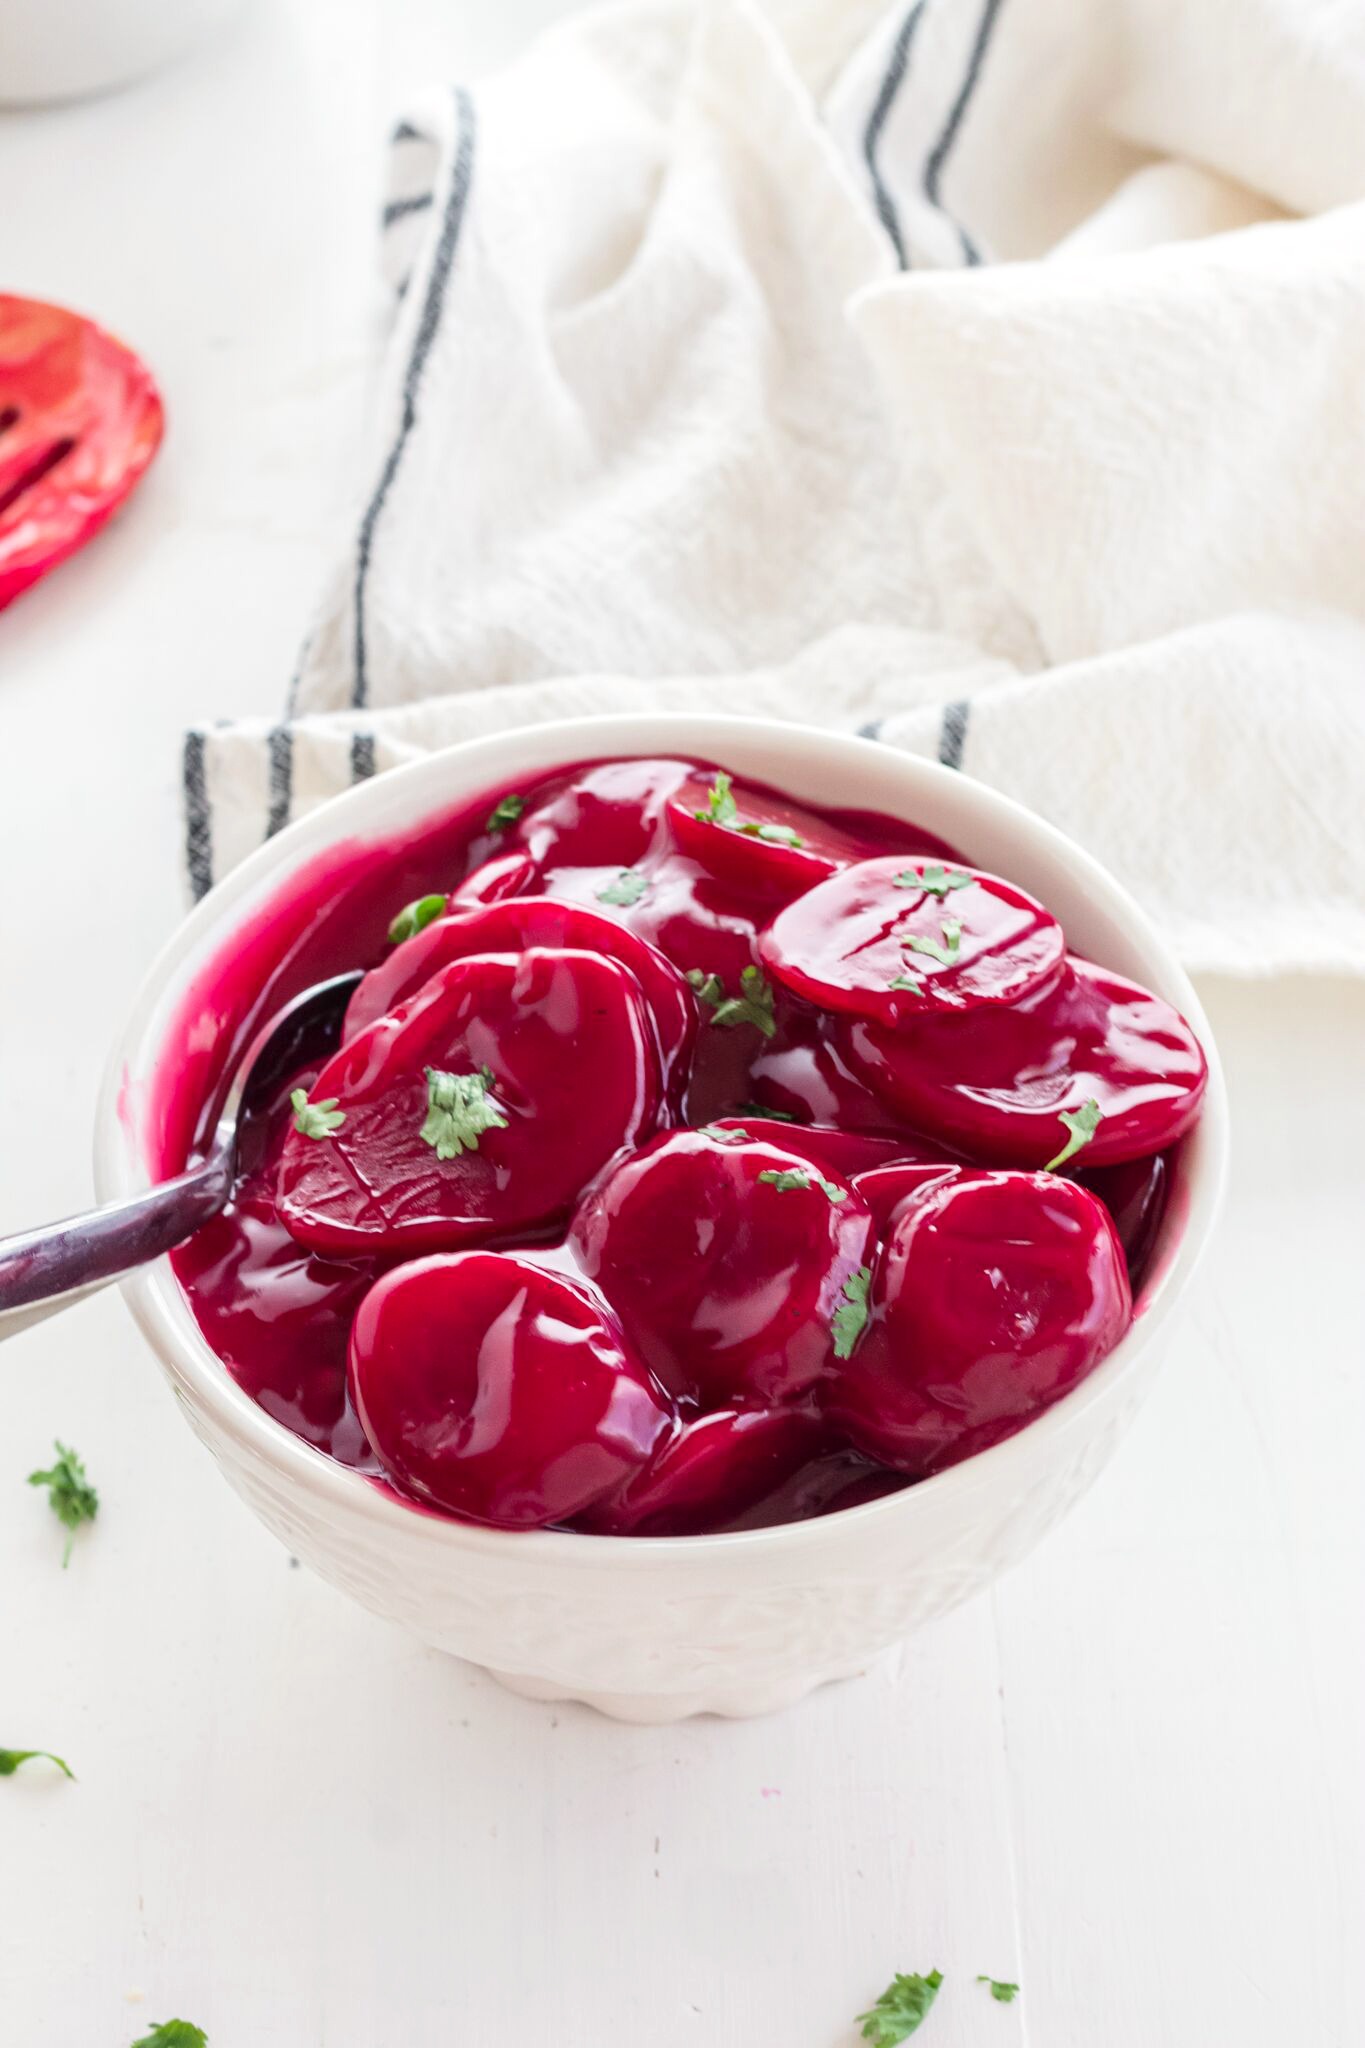 A white bowl of of harvard beets garnished with fresh parsley